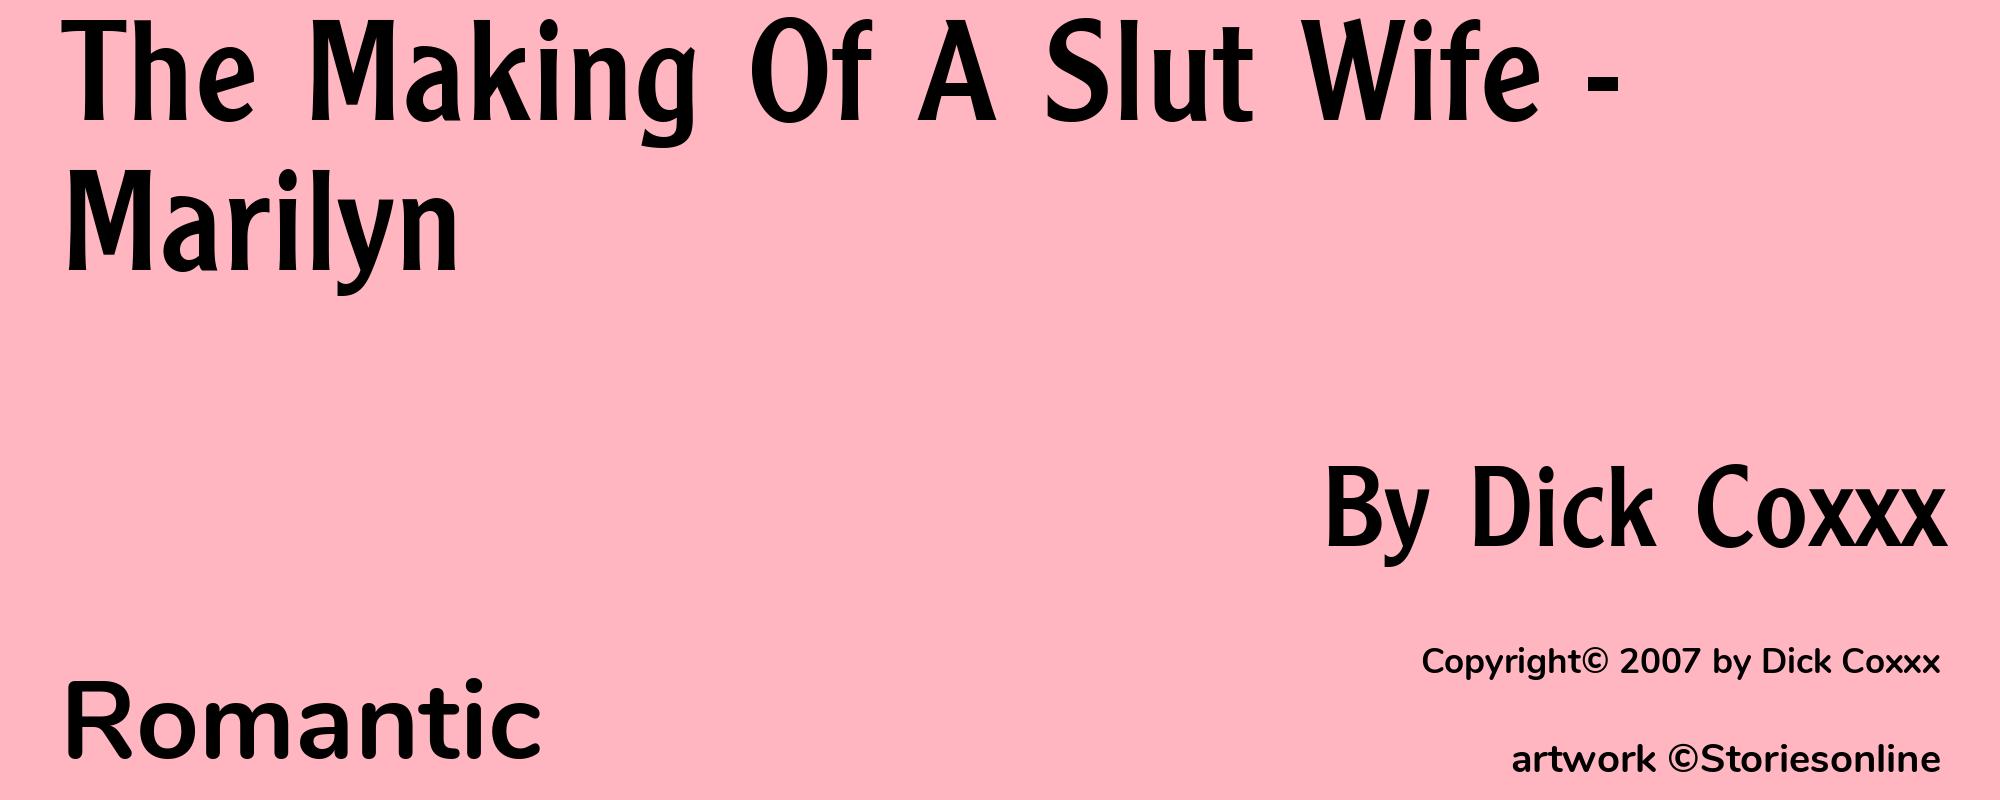 The Making Of A Slut Wife - Marilyn - Cover